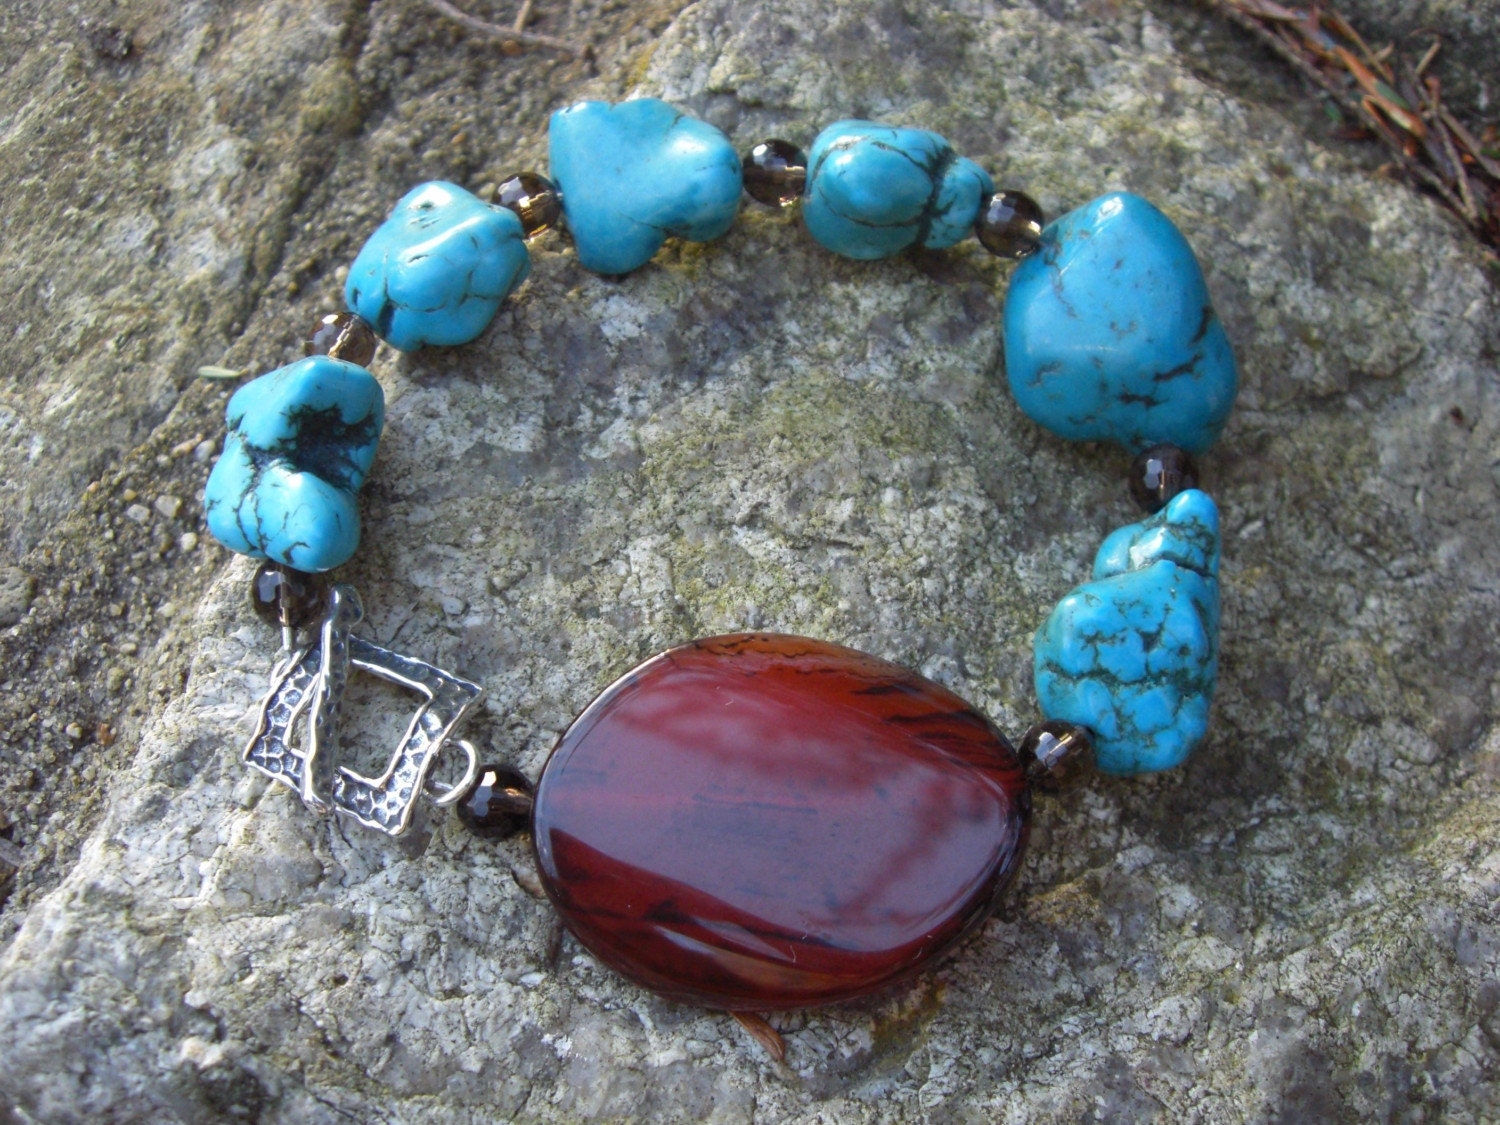 BLUE COVE BRACELET, TURQUOISE NUGGETS, SMOKEY QUARTZ, BOLD CARNELIAN STONE WITH HAMMERED SILVER TOGGLE